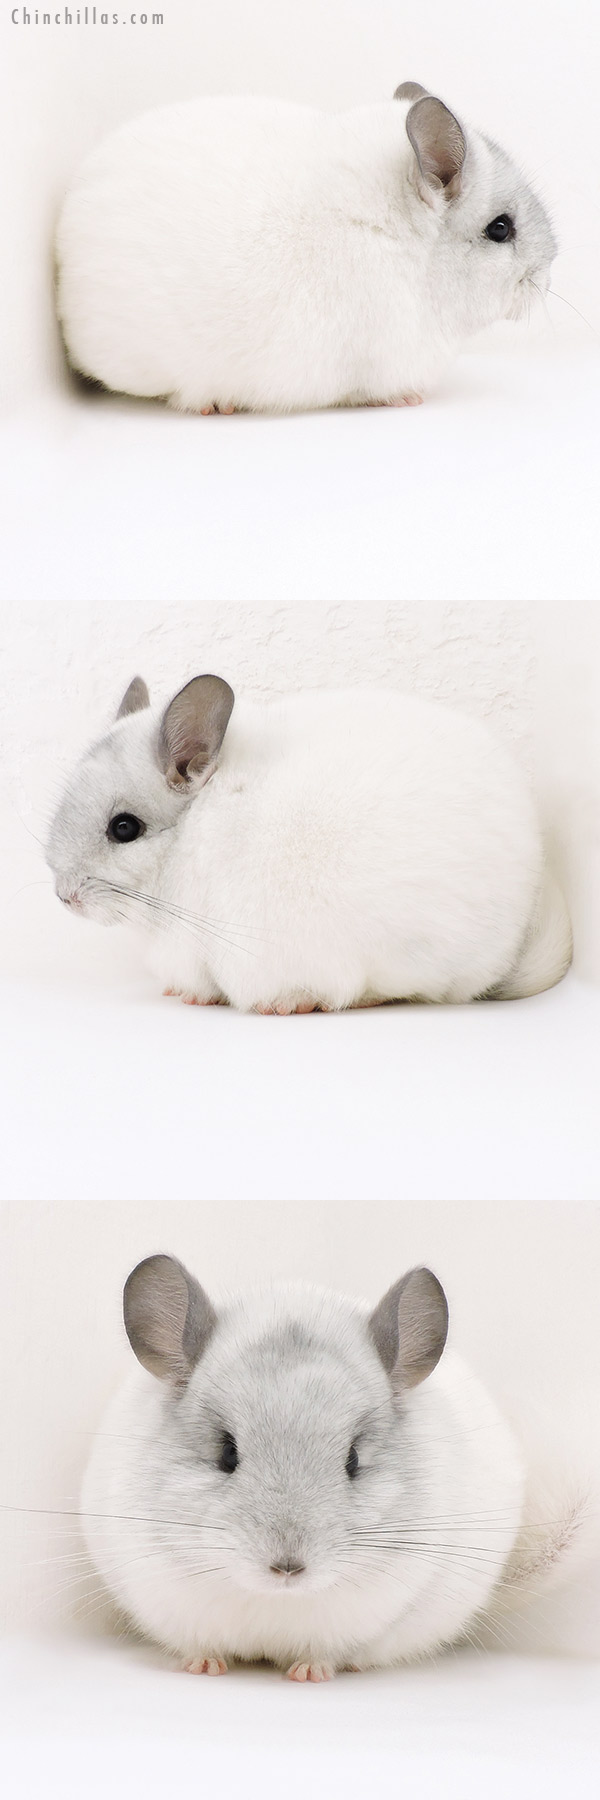 Chinchilla or related item offered for sale or export on Chinchillas.com - 19211 Blocky Premium Production Quality White Mosaic Female Chinchilla